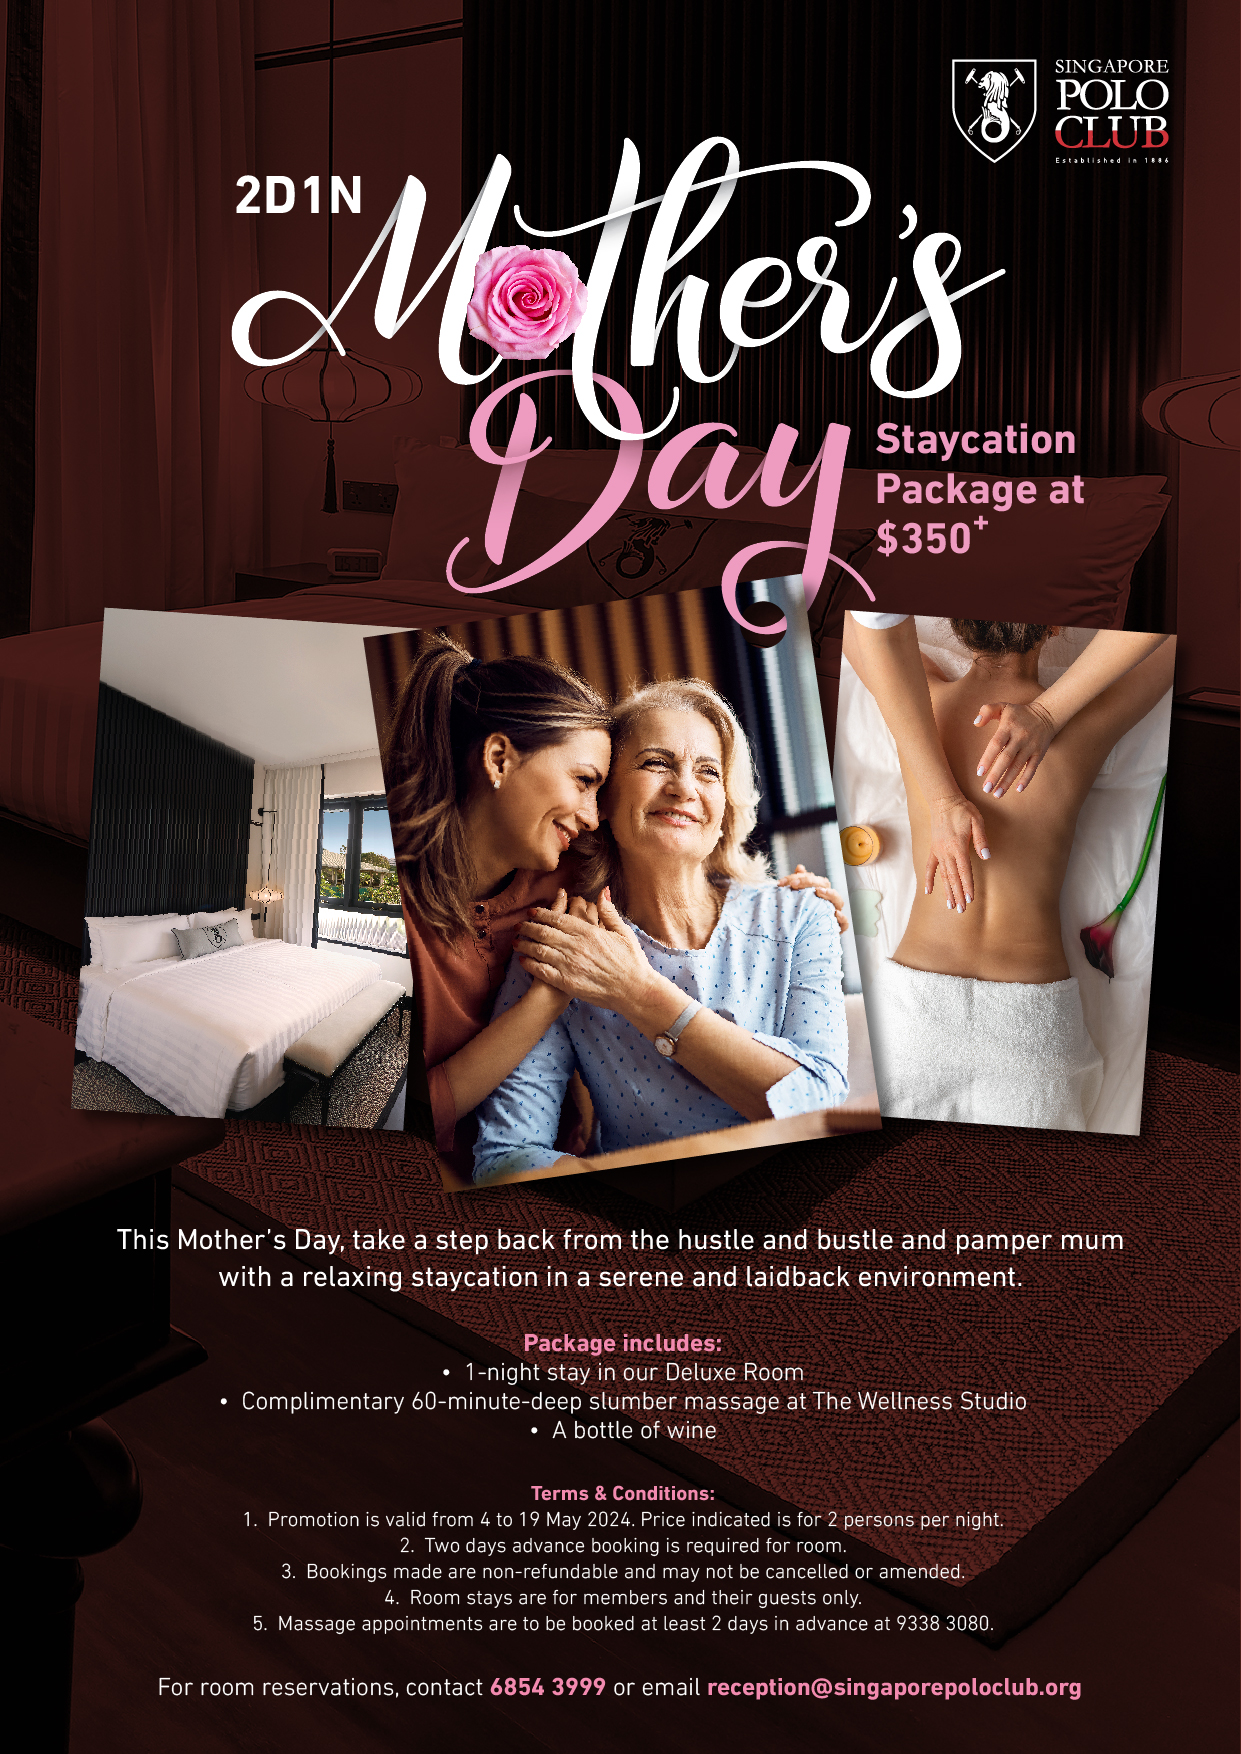 2D1N Mothers Day Staycation Package